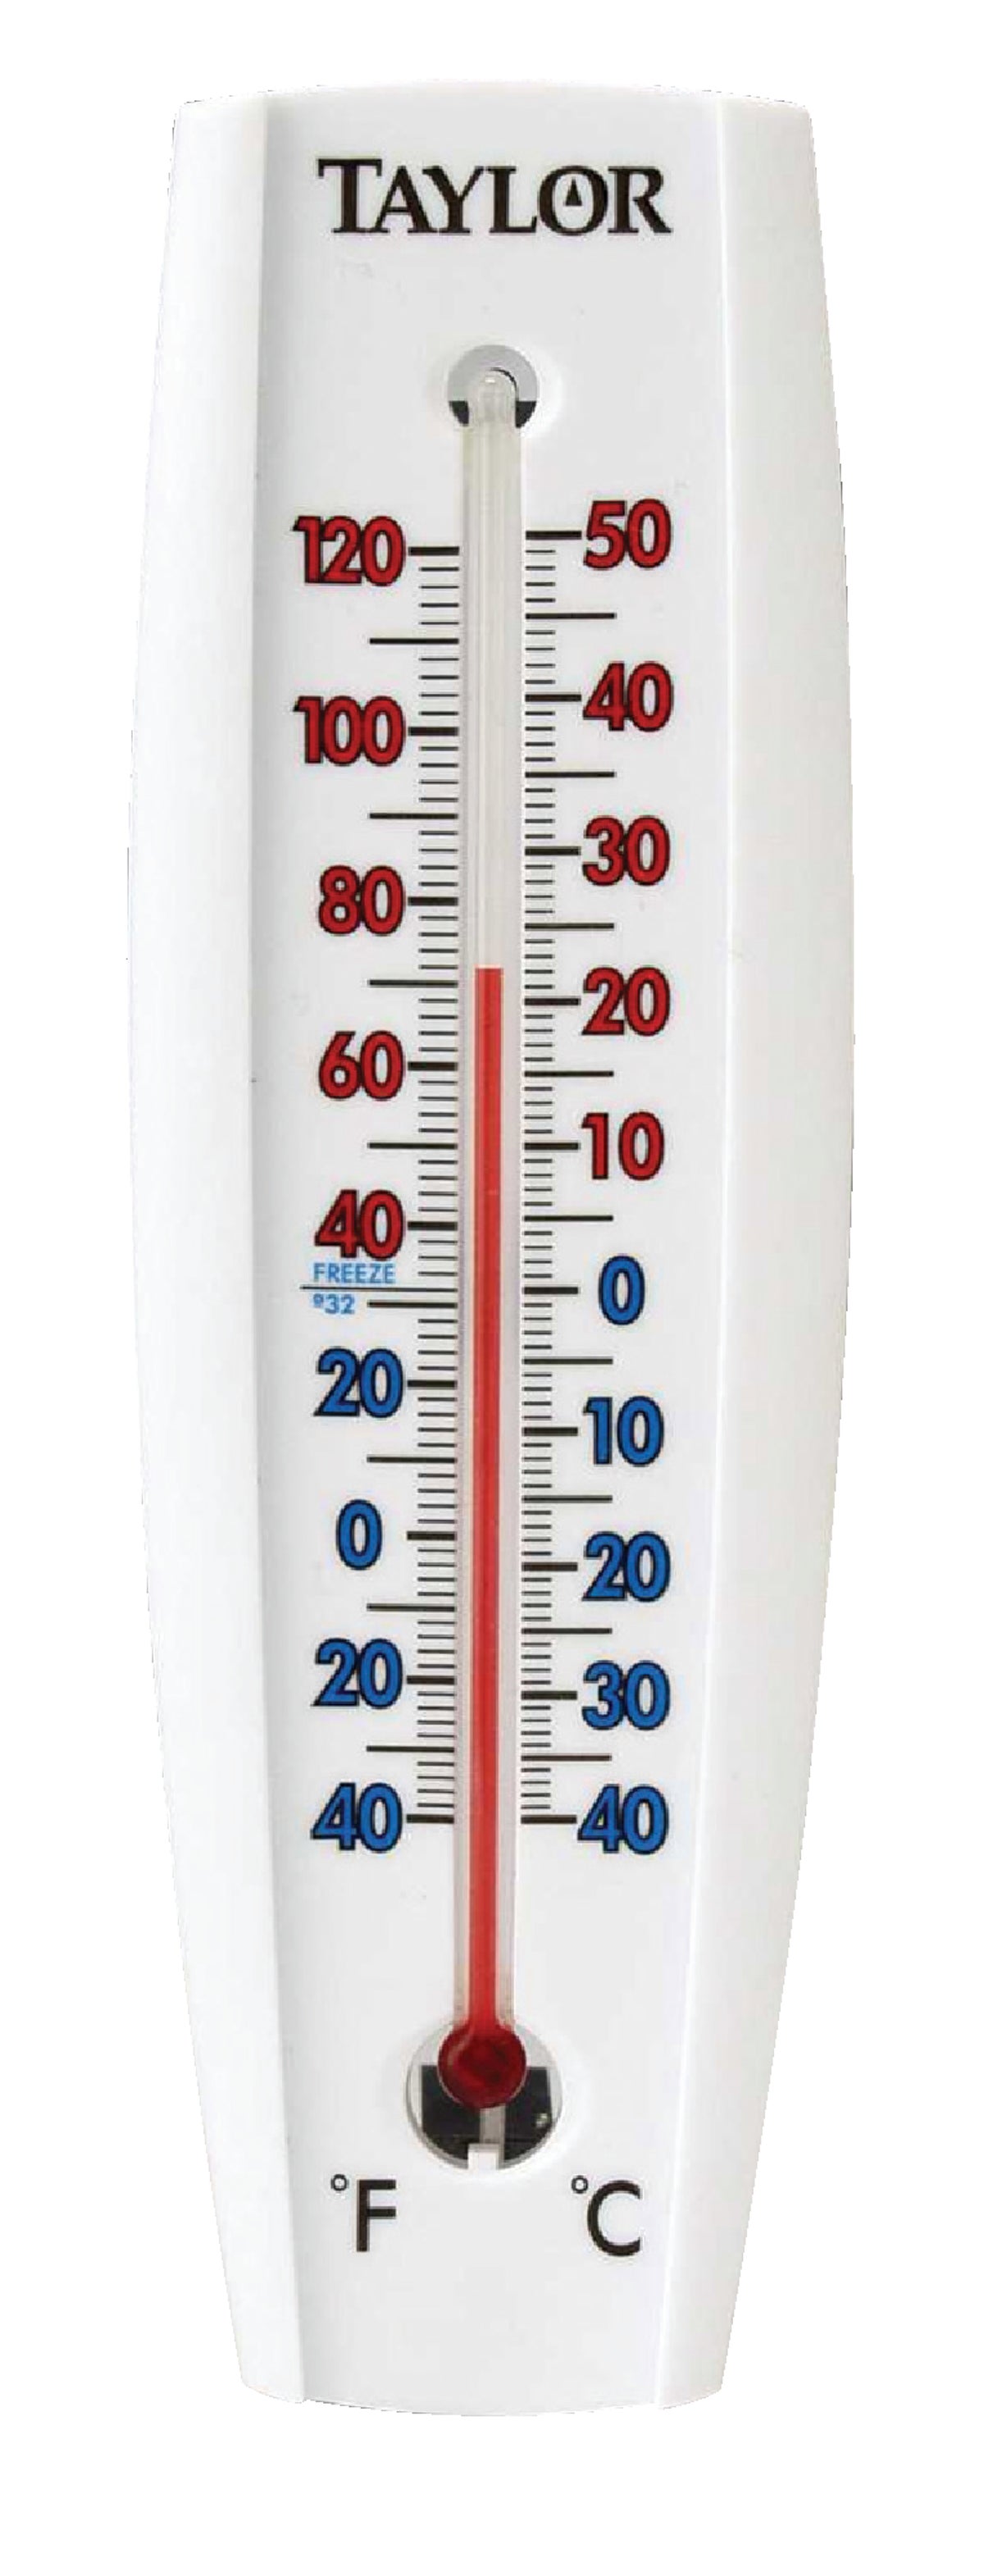 6.5 x 3.375 Wood Indoor Wall Thermometer